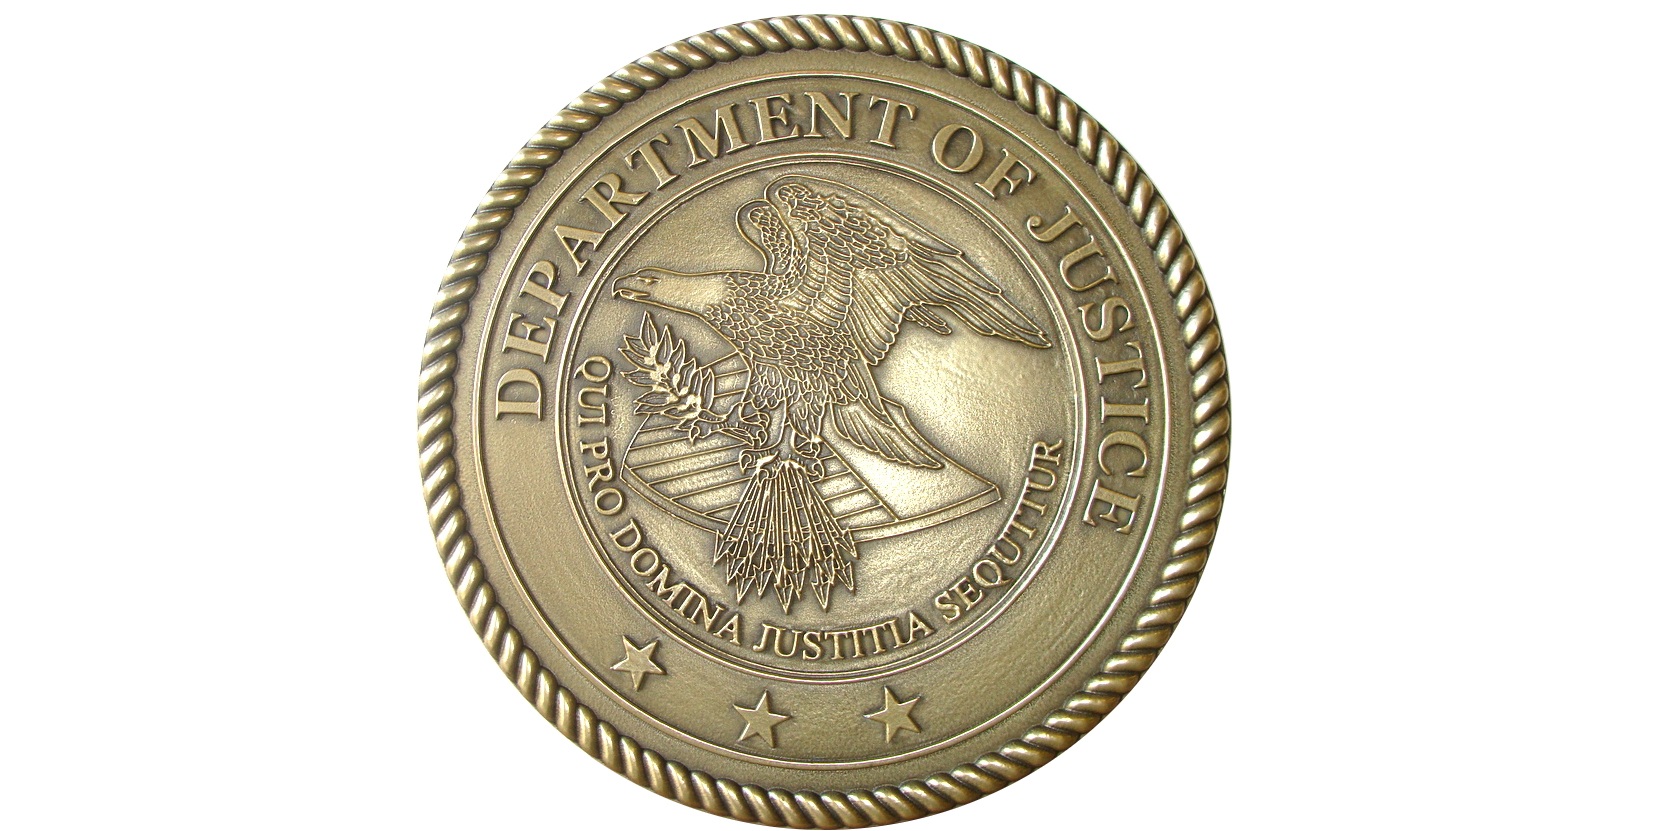 US Dept of Justice Seal